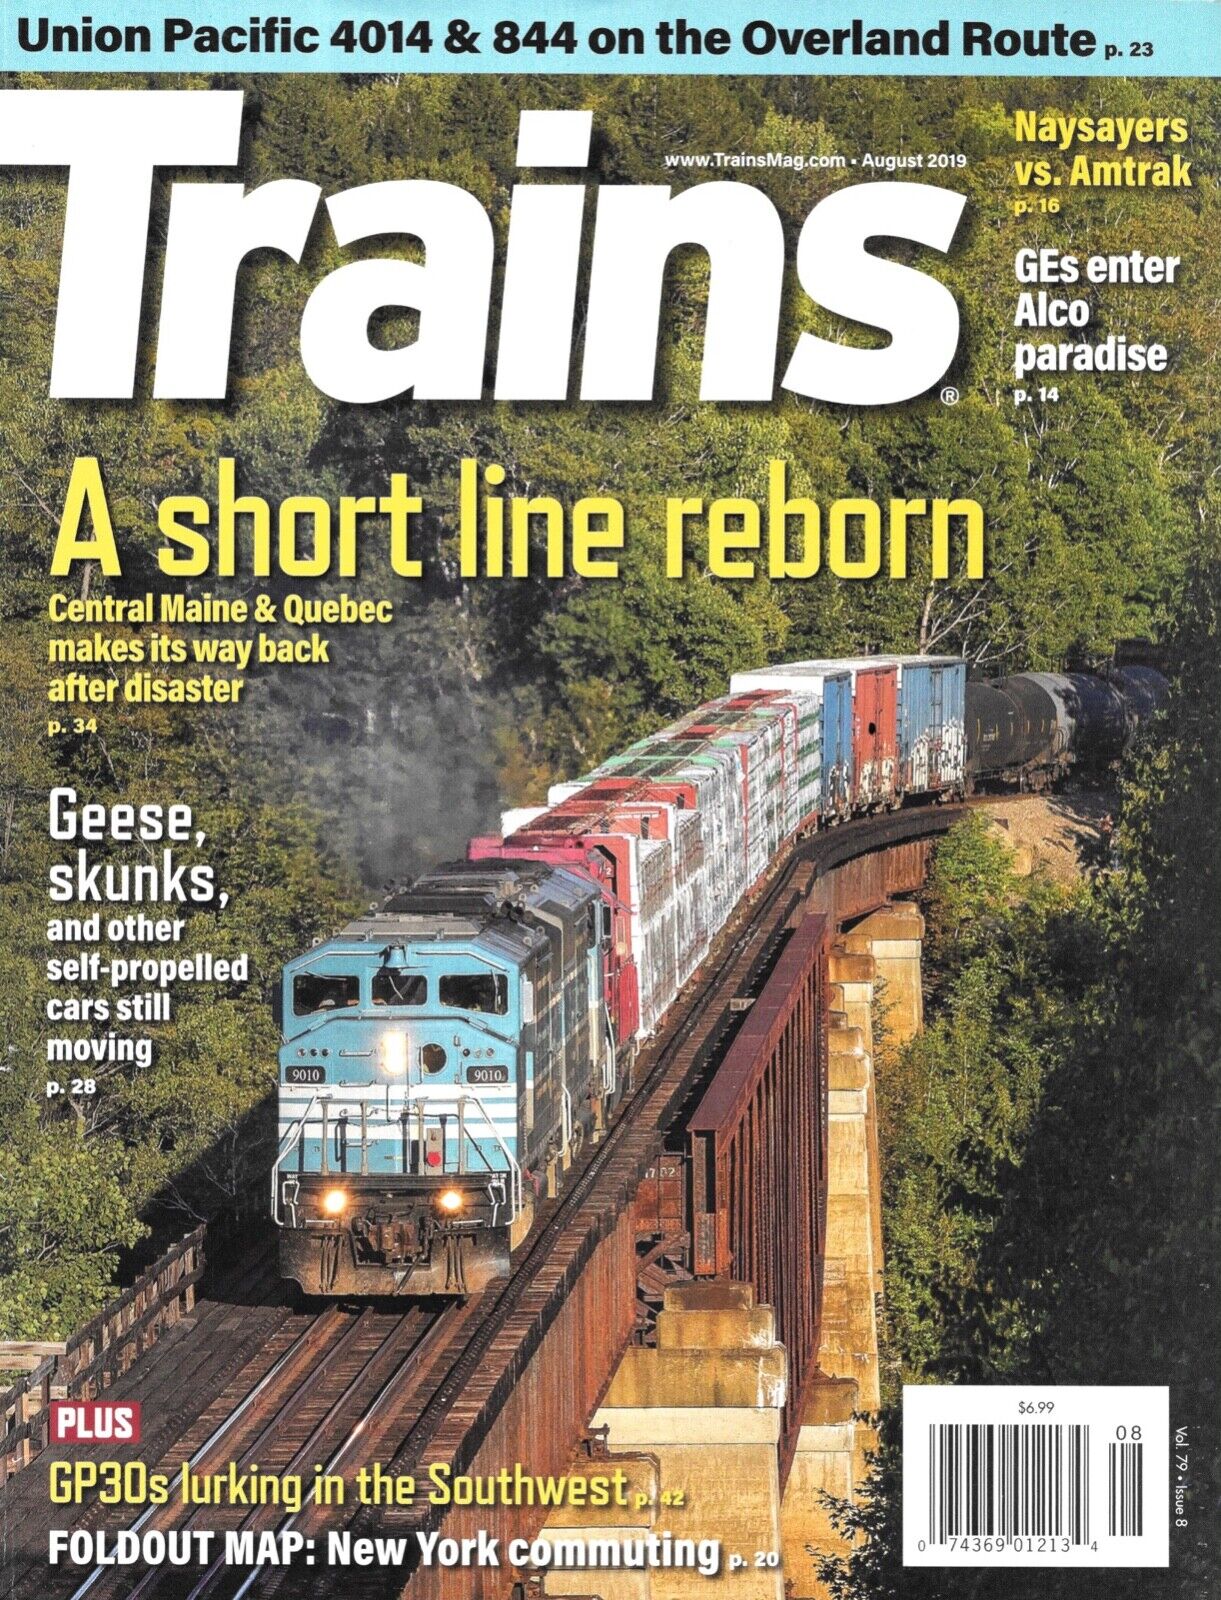 Trains Magazine Aug. 2019 GE Alco Diesels Union Pacific Overland Route Railcars